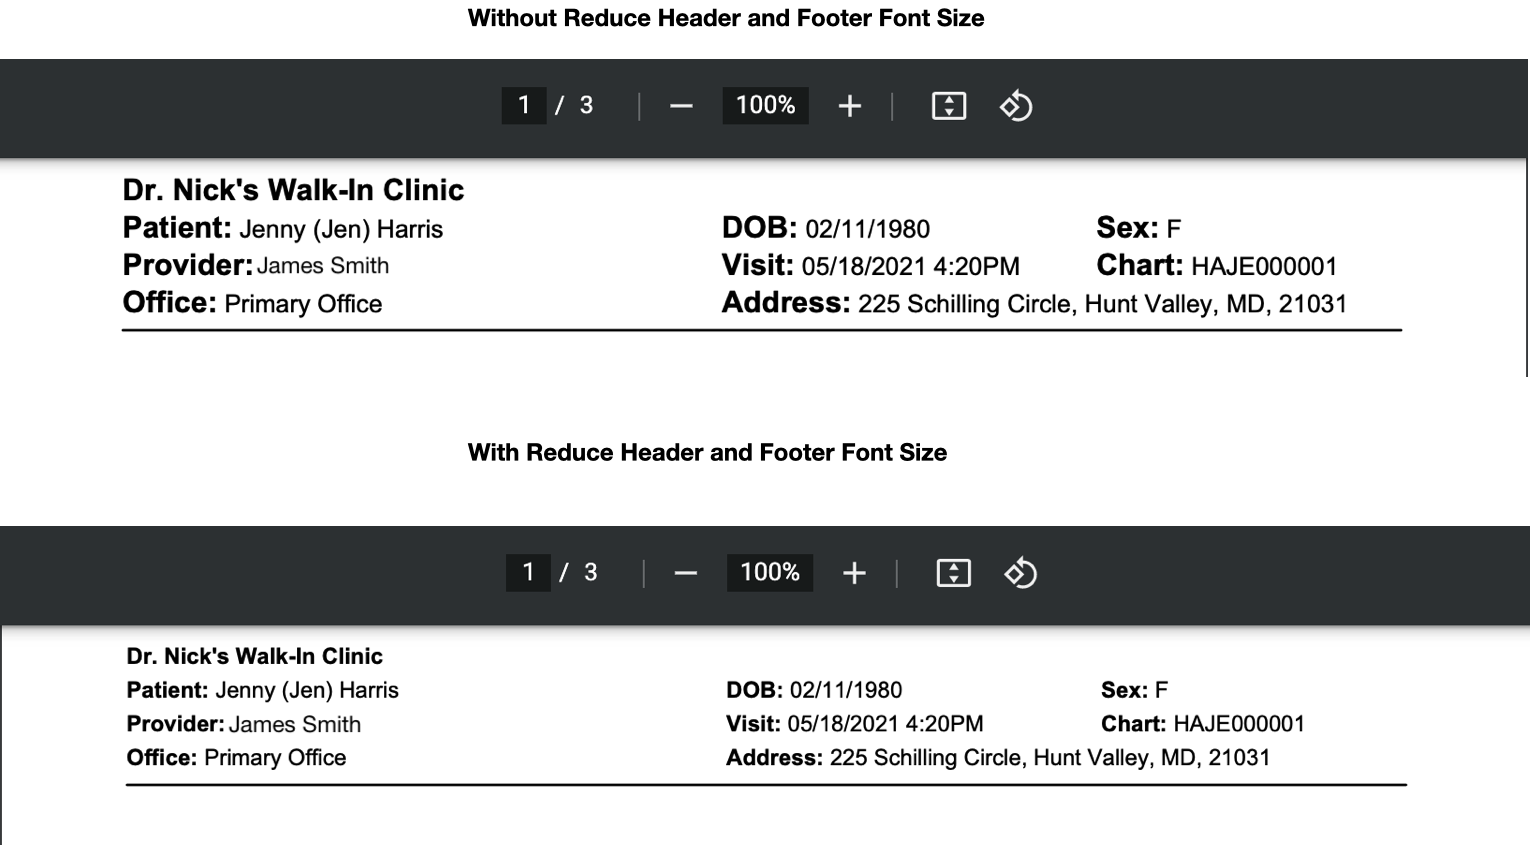 Clinical_Note_Header_Footer_Reduce.png